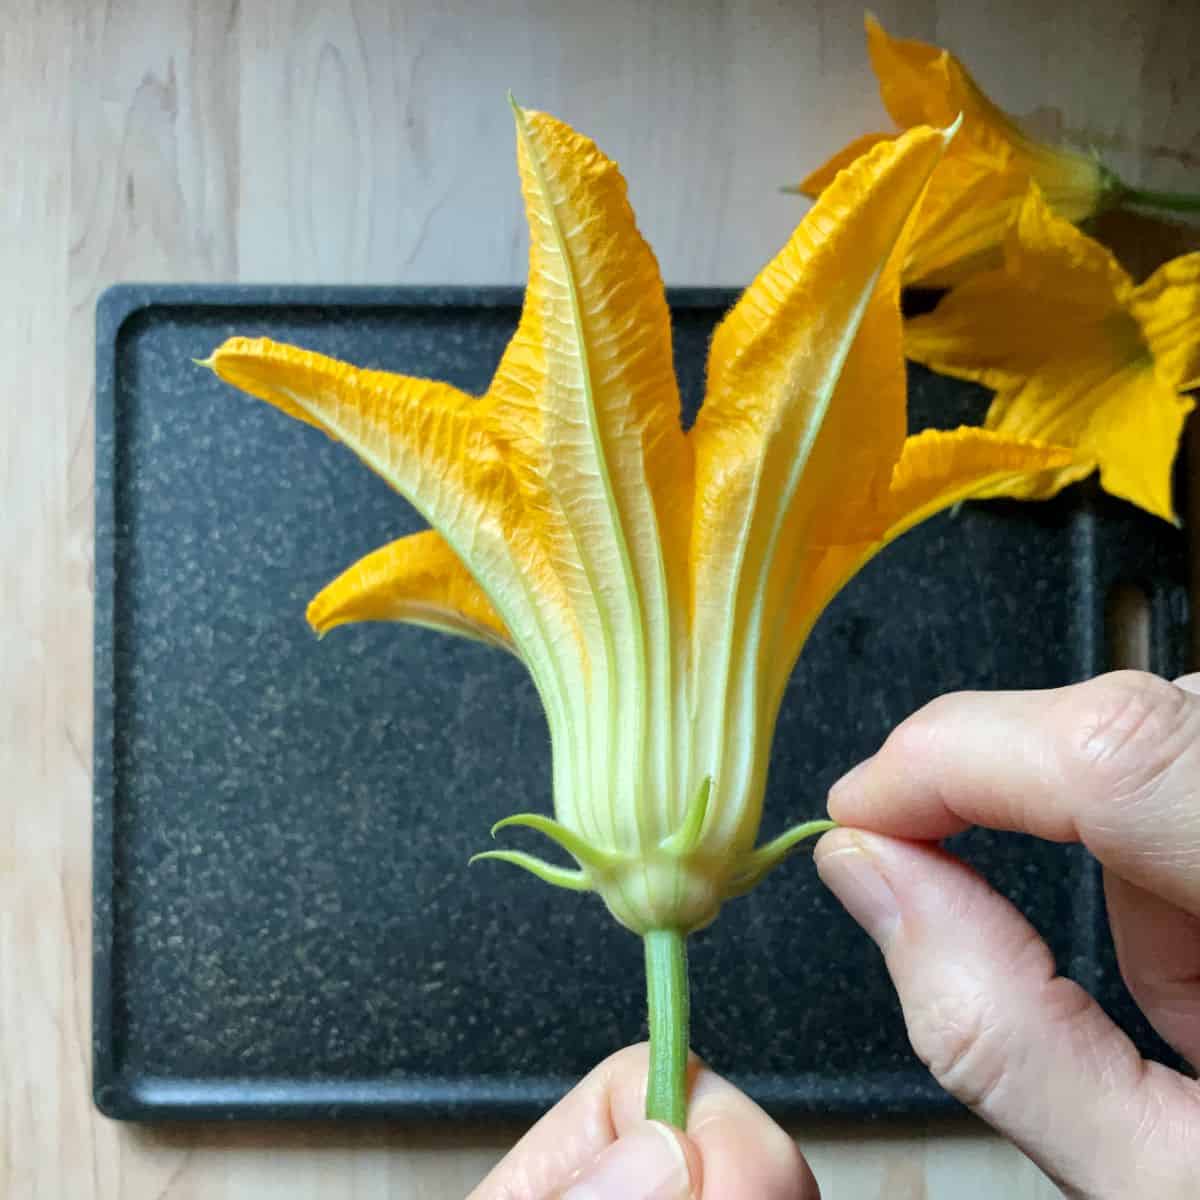 Removing the sepal of a male zucchini flower.